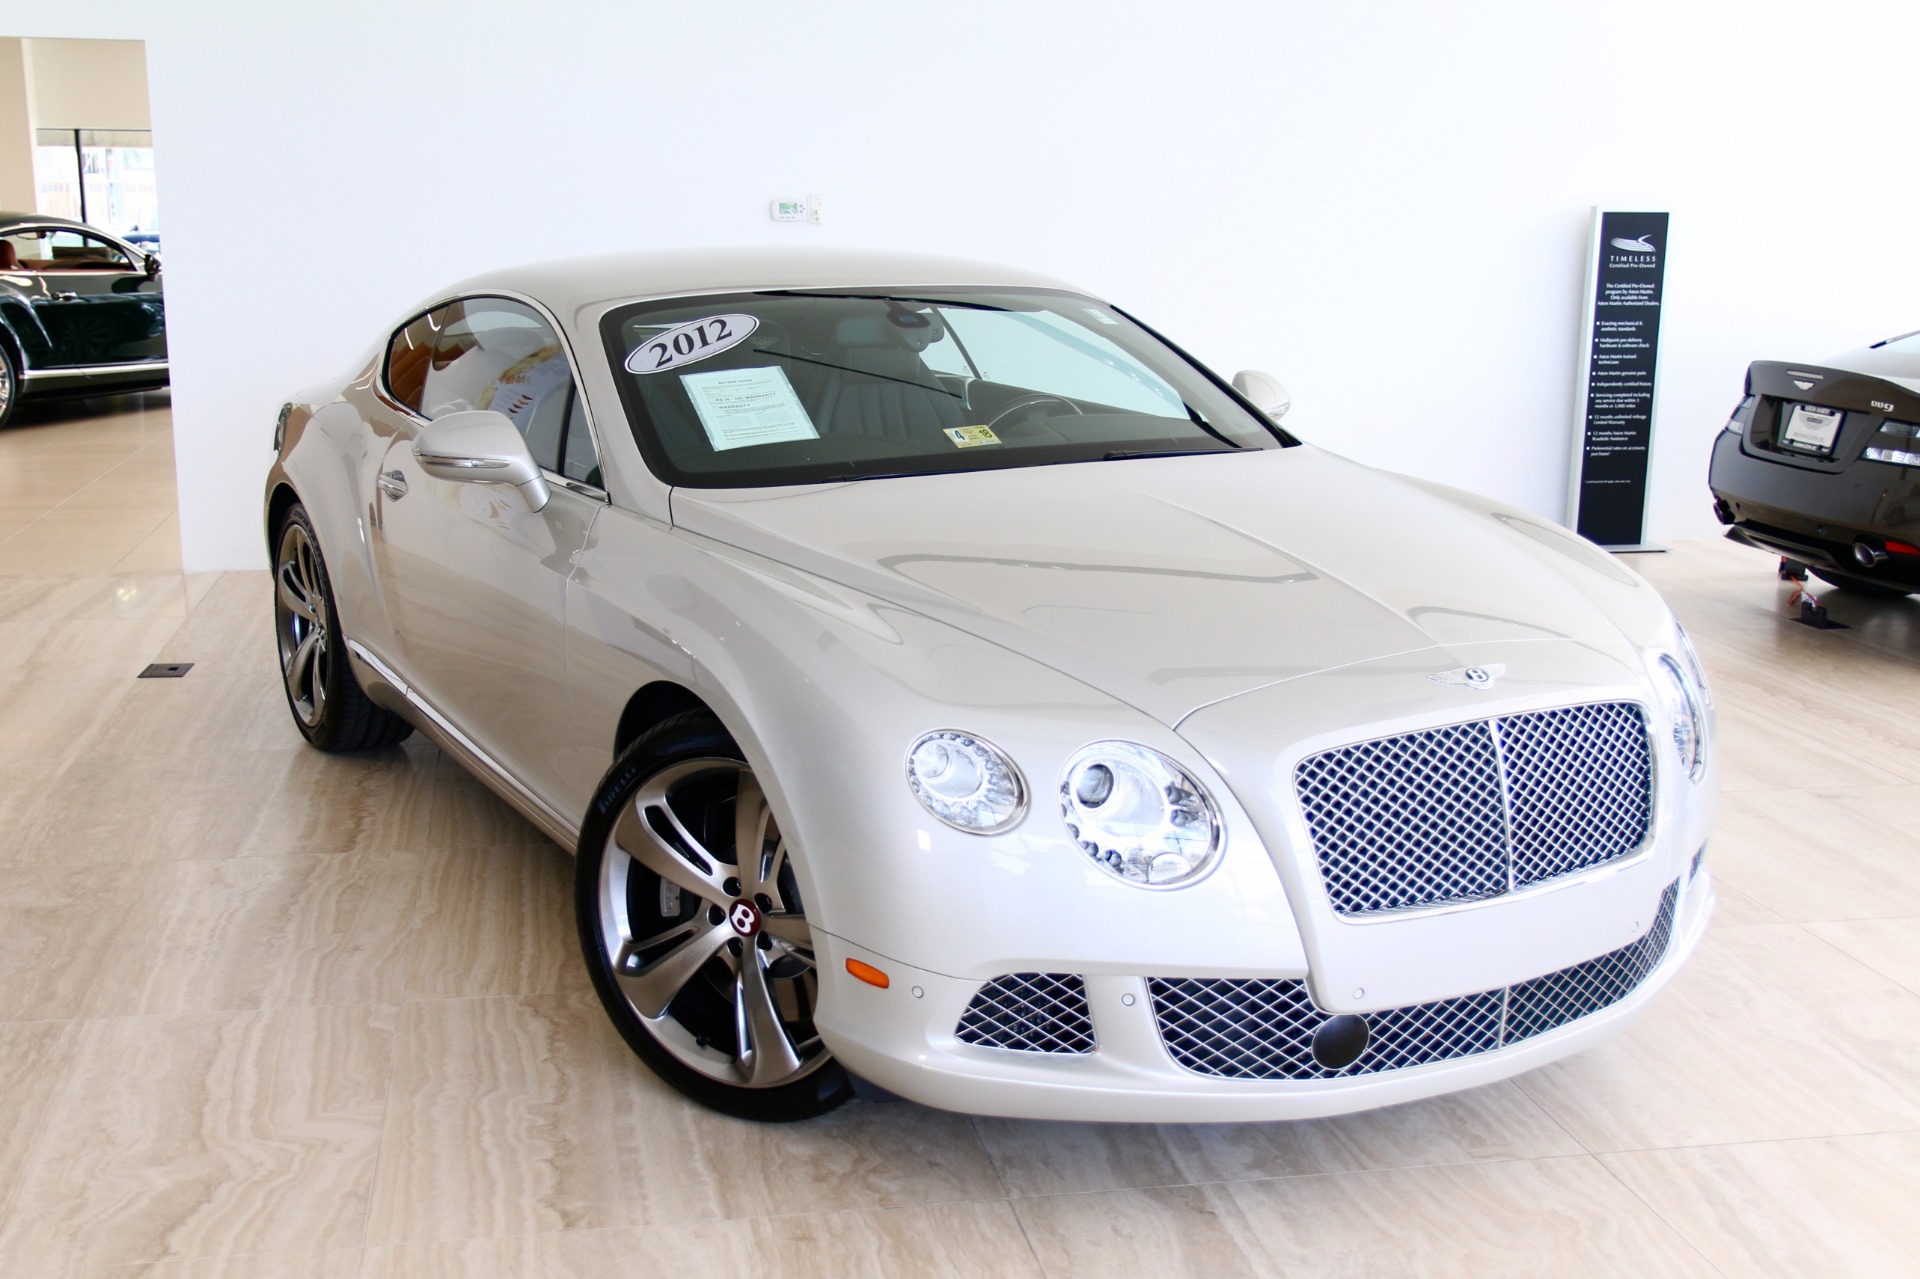 Used 2014 Bentley Continental GTC Speed $257,510 MSRP! Mulliner Driving  Spec! Front Seat Comfort Spec! For Sale (Special Pricing) | Chicago Motor  Cars Stock #20236A